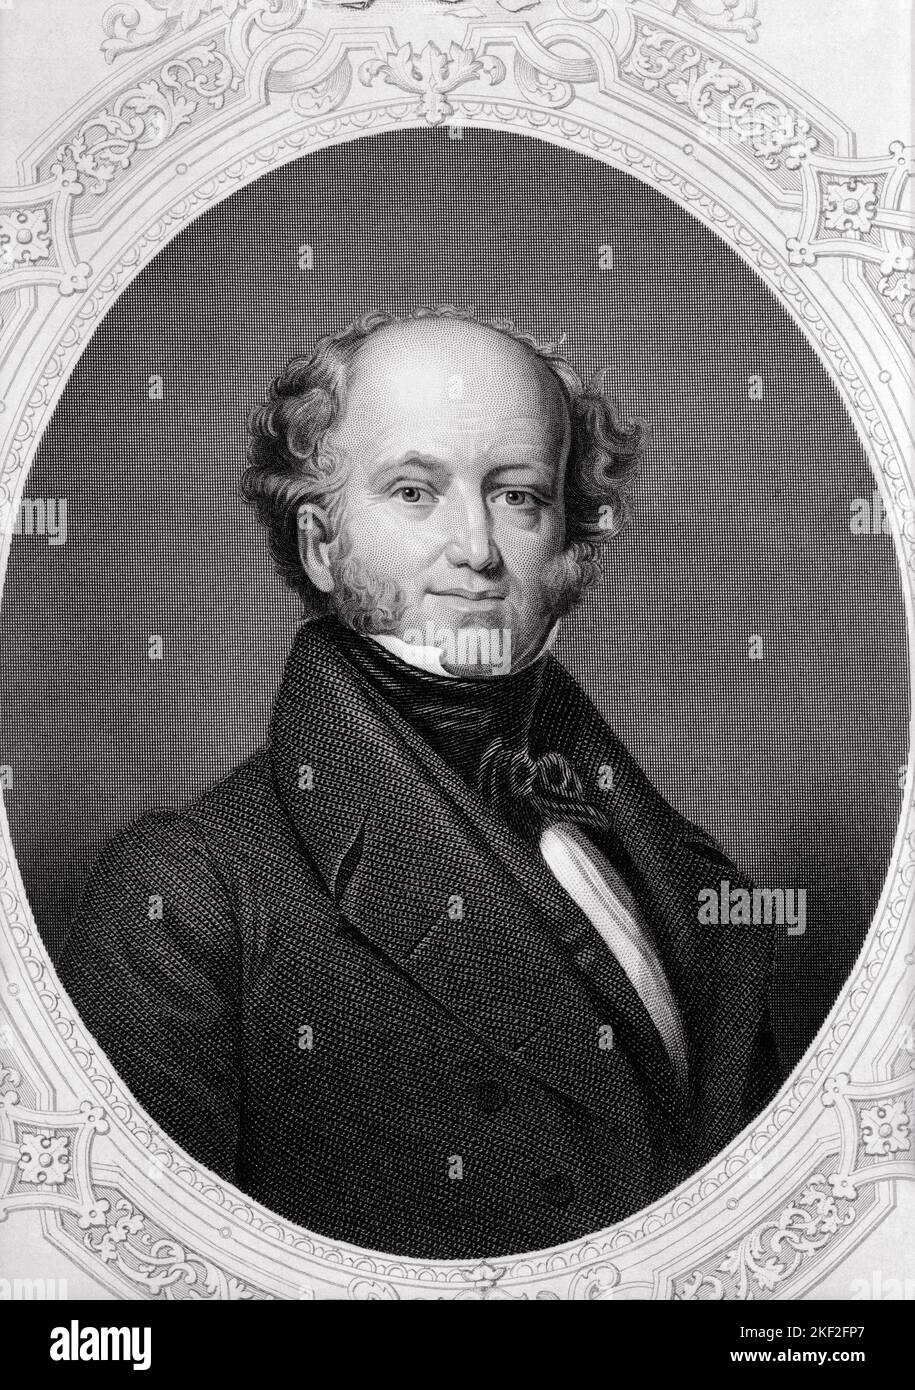 1800s PORTRAIT MARTIN VAN BUREN 8TH PRESIDENT OF THE UNITED STATES LOOKING AT CAMERA PICTURE BY HENRY INMAN CIRCA 1812 - q53259 CPC001 HARS POLITICS SERVED 8TH CONCEPTUAL NEW YORK EIGHTH STYLISH 1840 SECRETARY OF STATE CIRCA DEMOCRAT MARTIN VAN BUREN STATESMAN TENTH BLACK AND WHITE FOUNDER NEW YORKER OLD FASHIONED Stock Photo